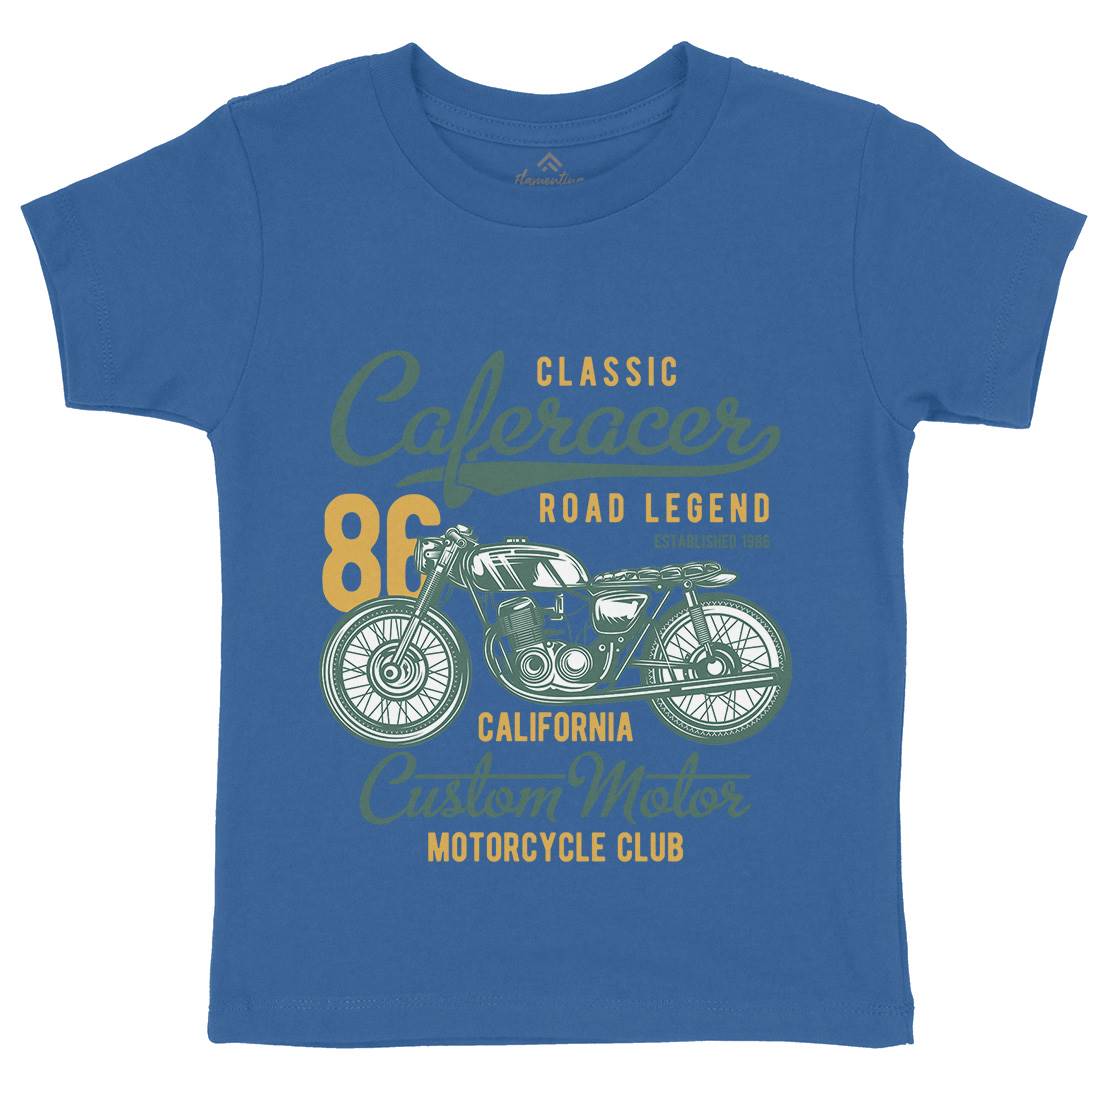 Caferacer Kids Crew Neck T-Shirt Motorcycles B834